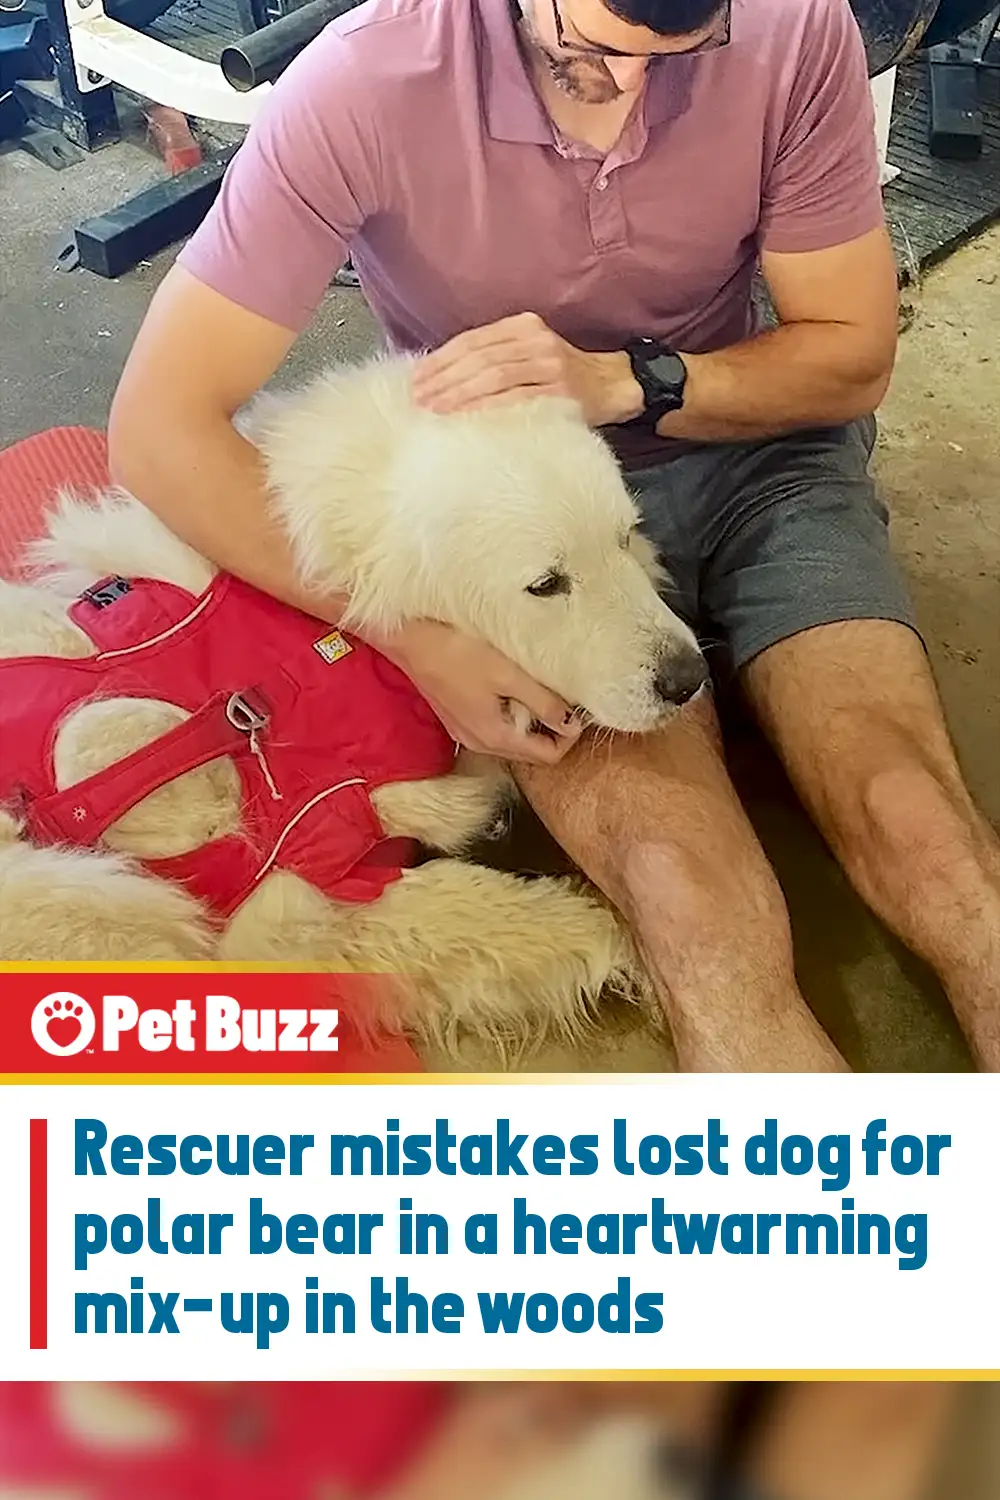 Rescuer mistakes lost dog for polar bear in a heartwarming mix-up in the woods